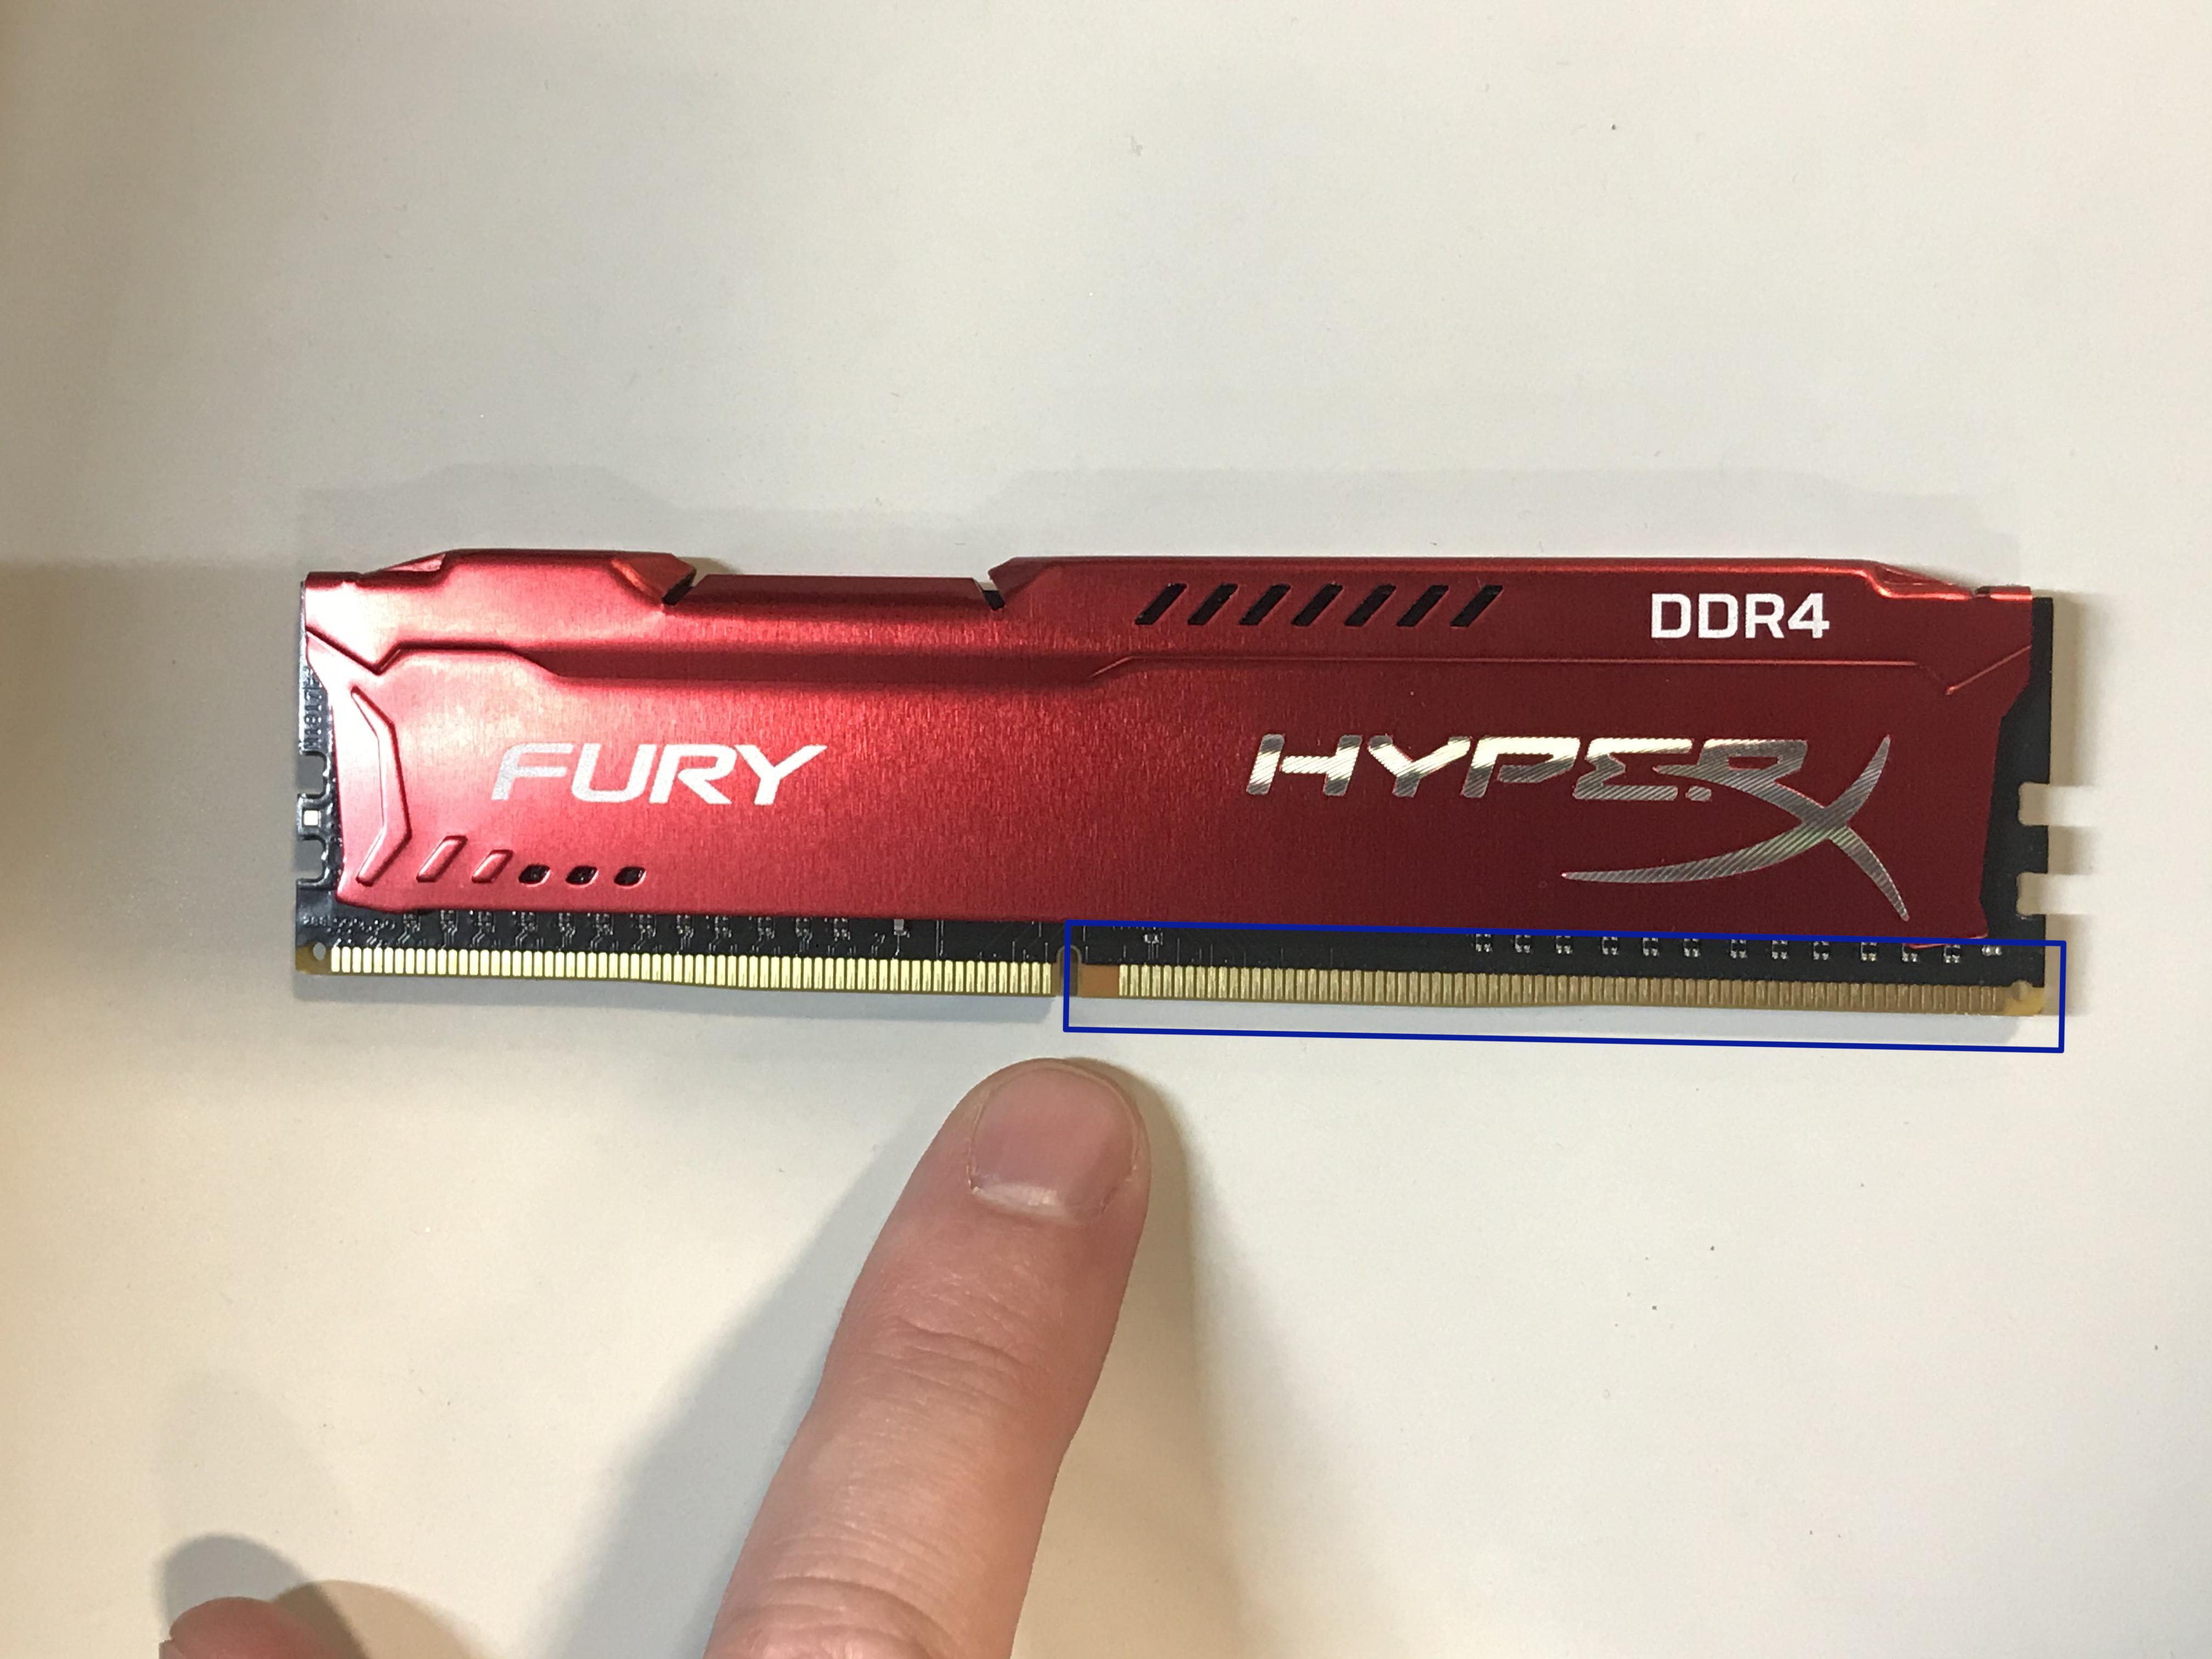 Placement of the RAM notch on the RAM stick